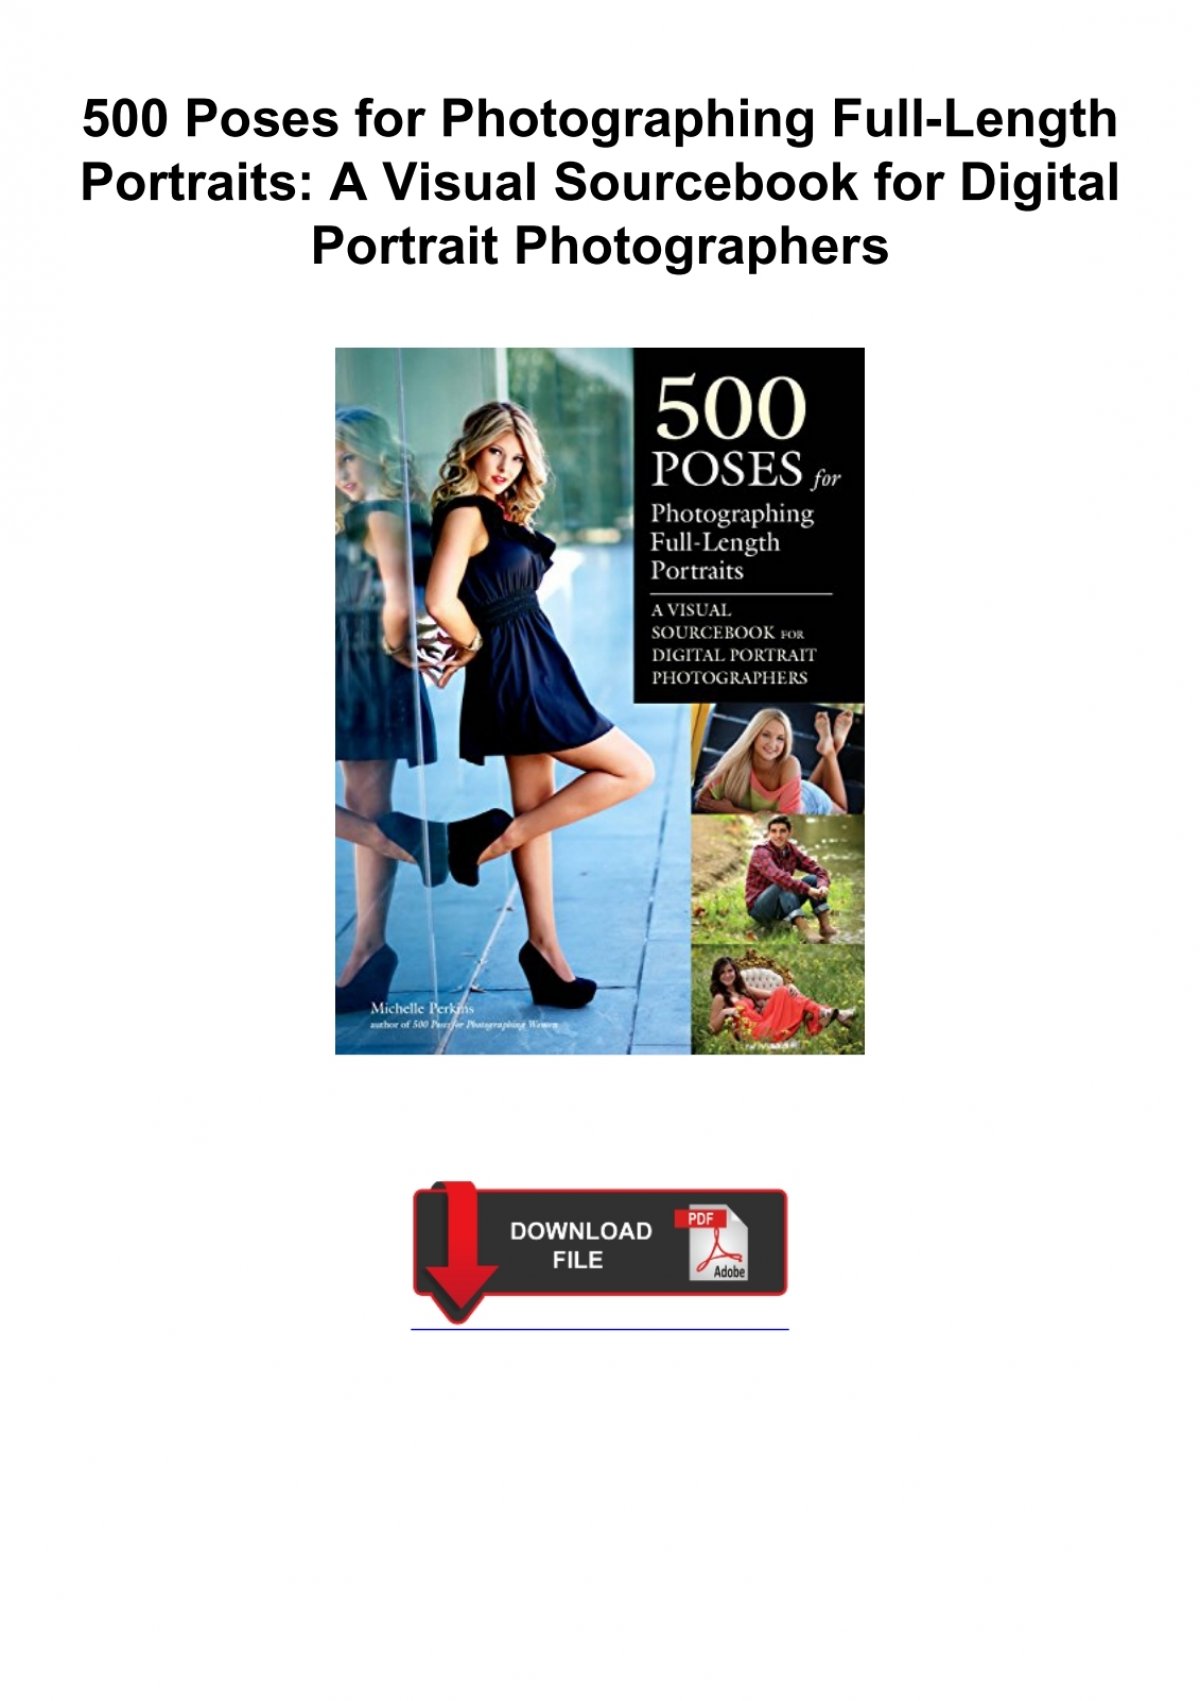 500 Poses for Photographing Full-Length Portraits: A Visual Sourcebook for  Digital Portrait Photographers by Michelle Perkins | Goodreads